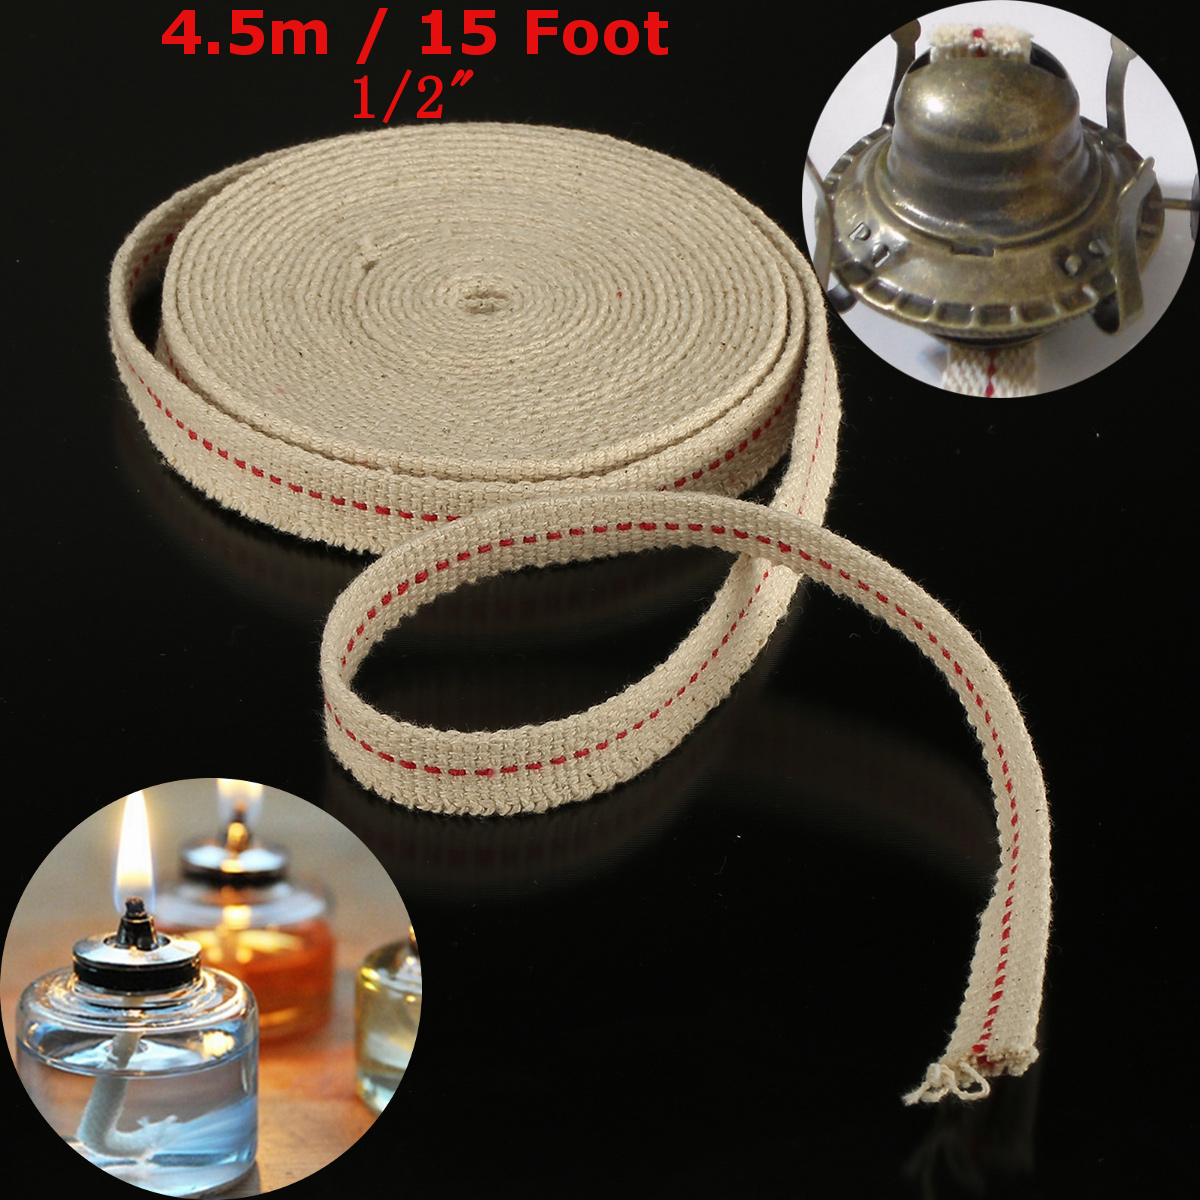 12-Inch-Flat-Cotton-Wick-15-Foot-Oil-Lamps-and-Lanterns-Cotton-Wick-45M-Length-1128942-6